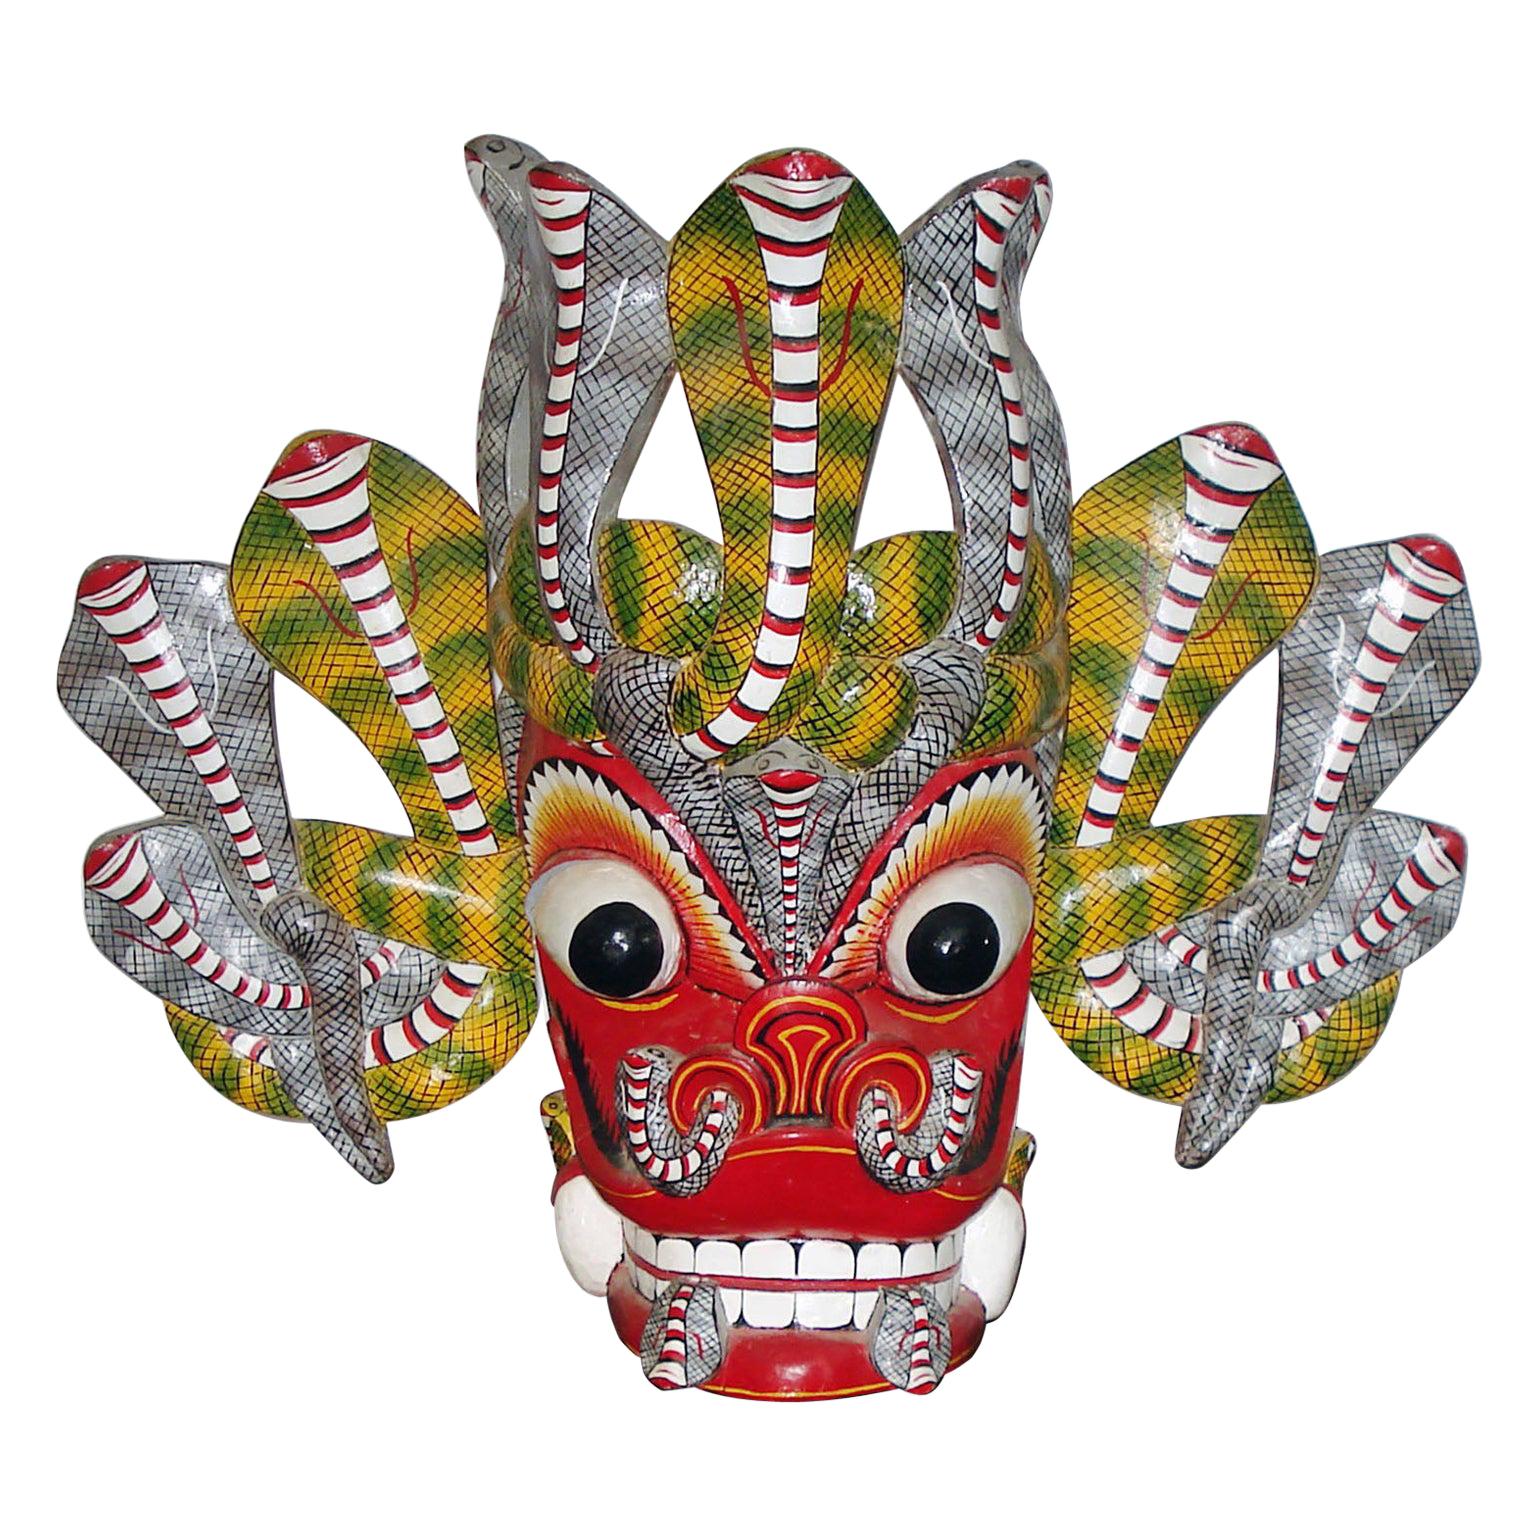 Large Hand-Carved Balinese Barong Dance Mask